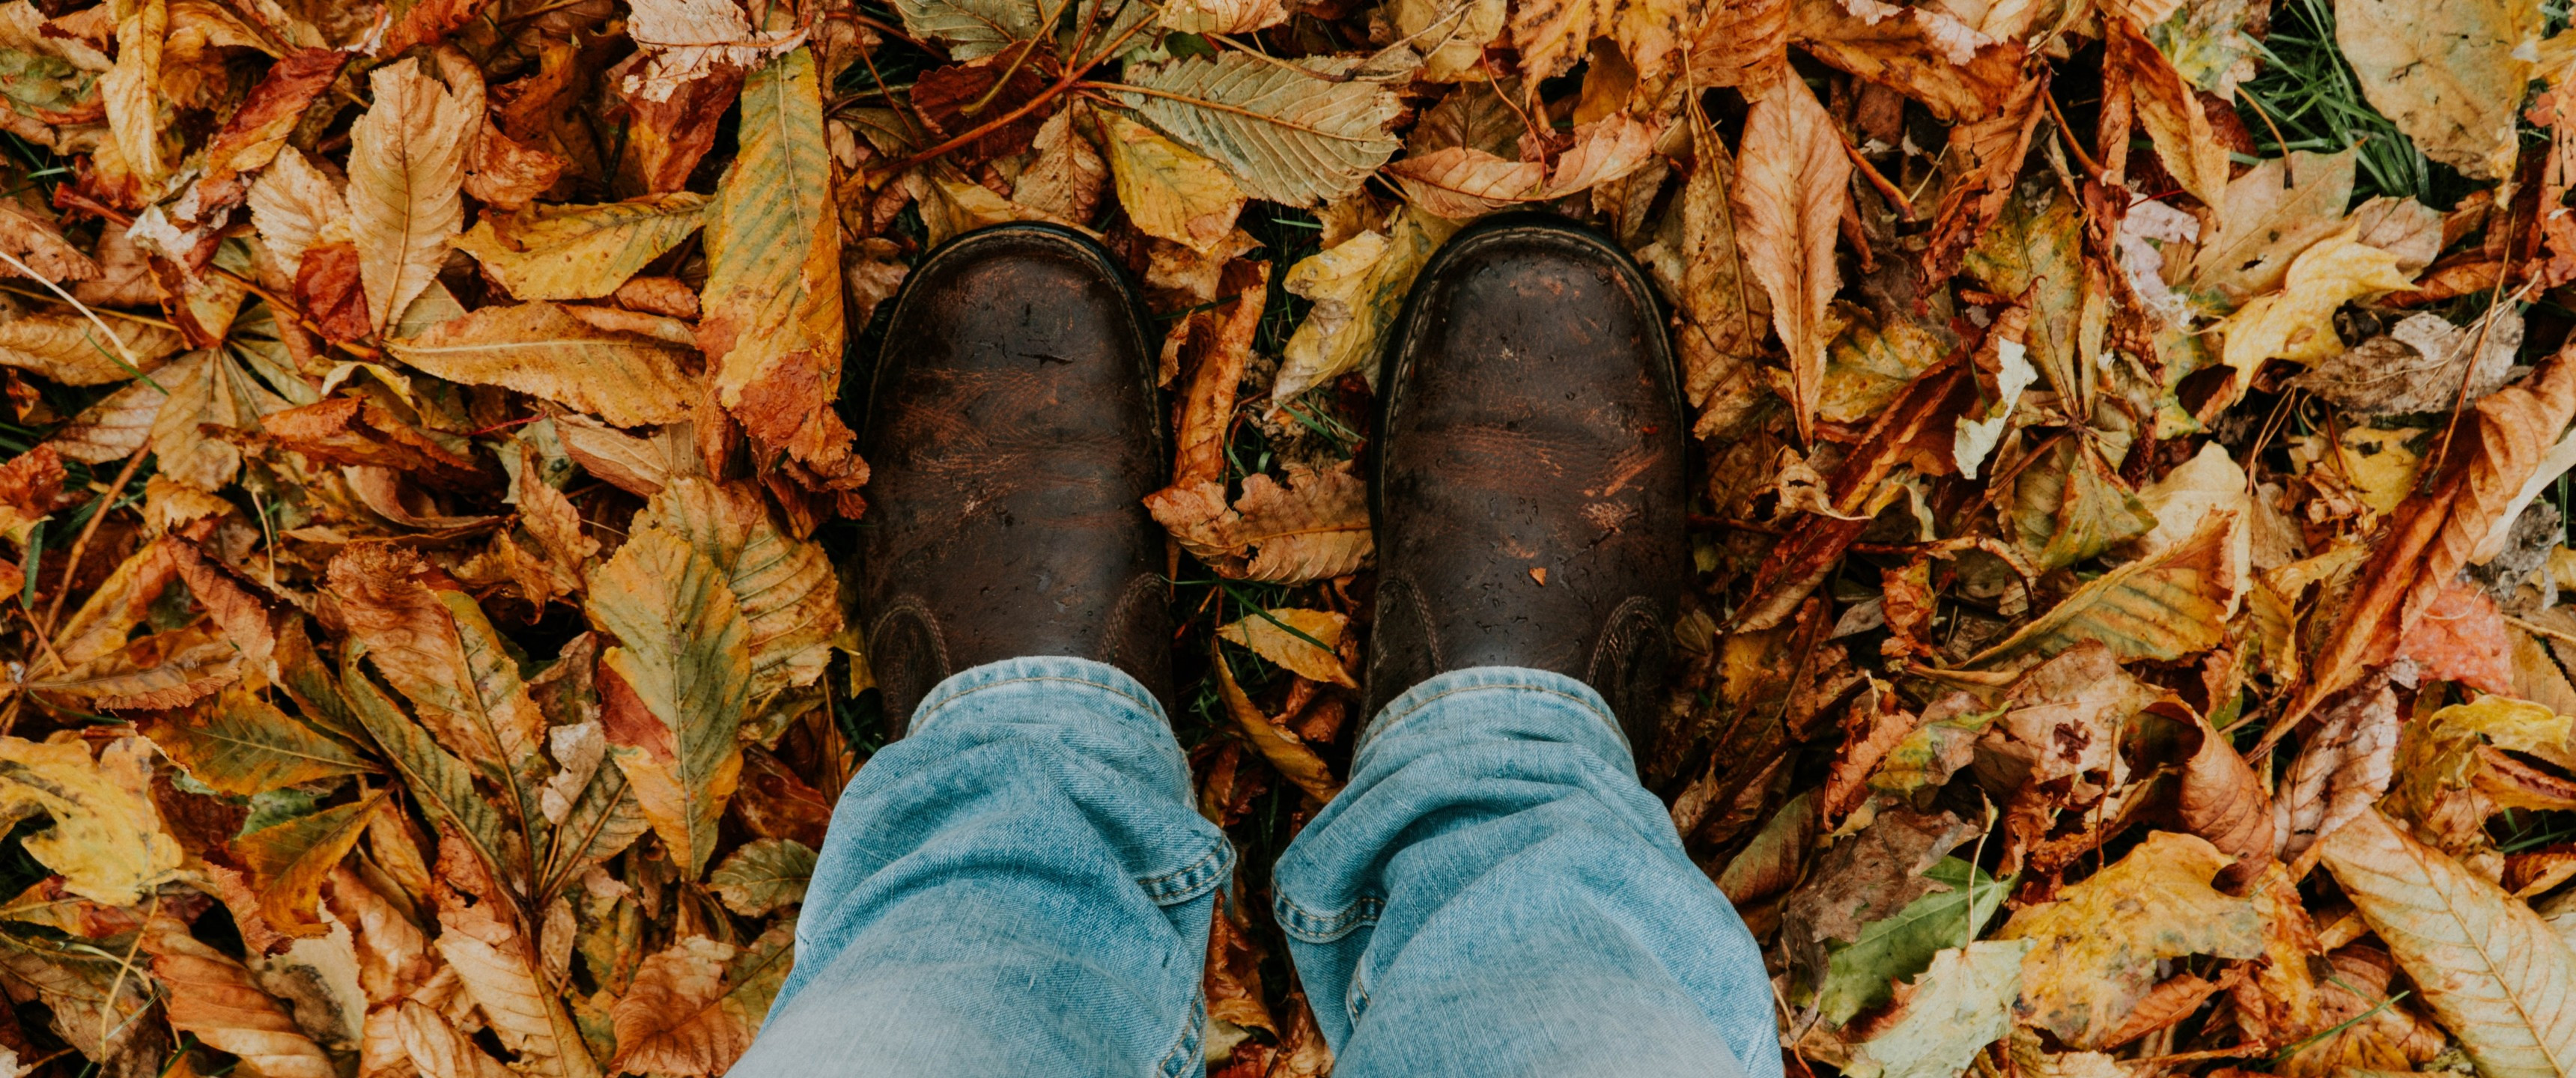 Download 3440x1440 Autumn, Leaves, Shoes, Fall Wallpaper